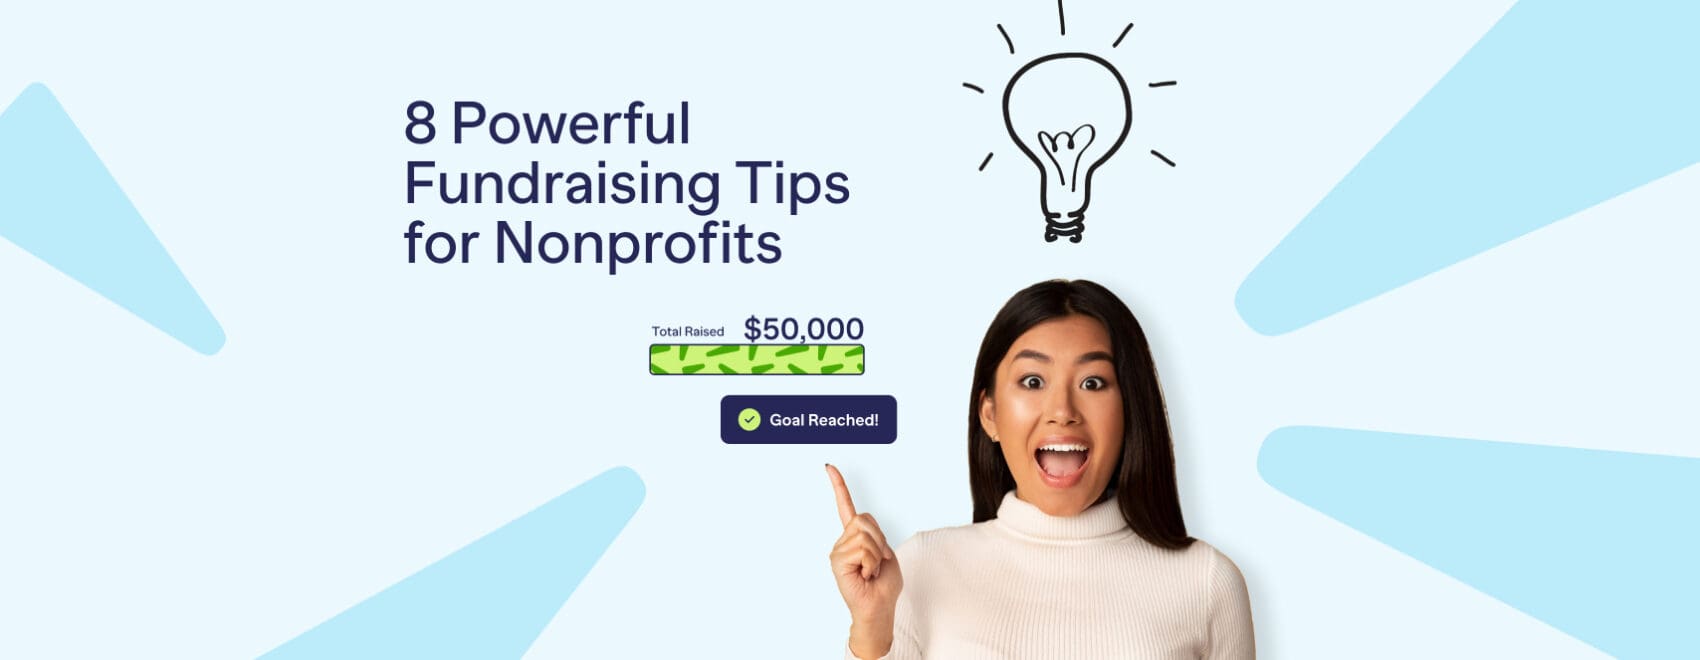 8 Powerful Fundraising Tips for Nonprofits